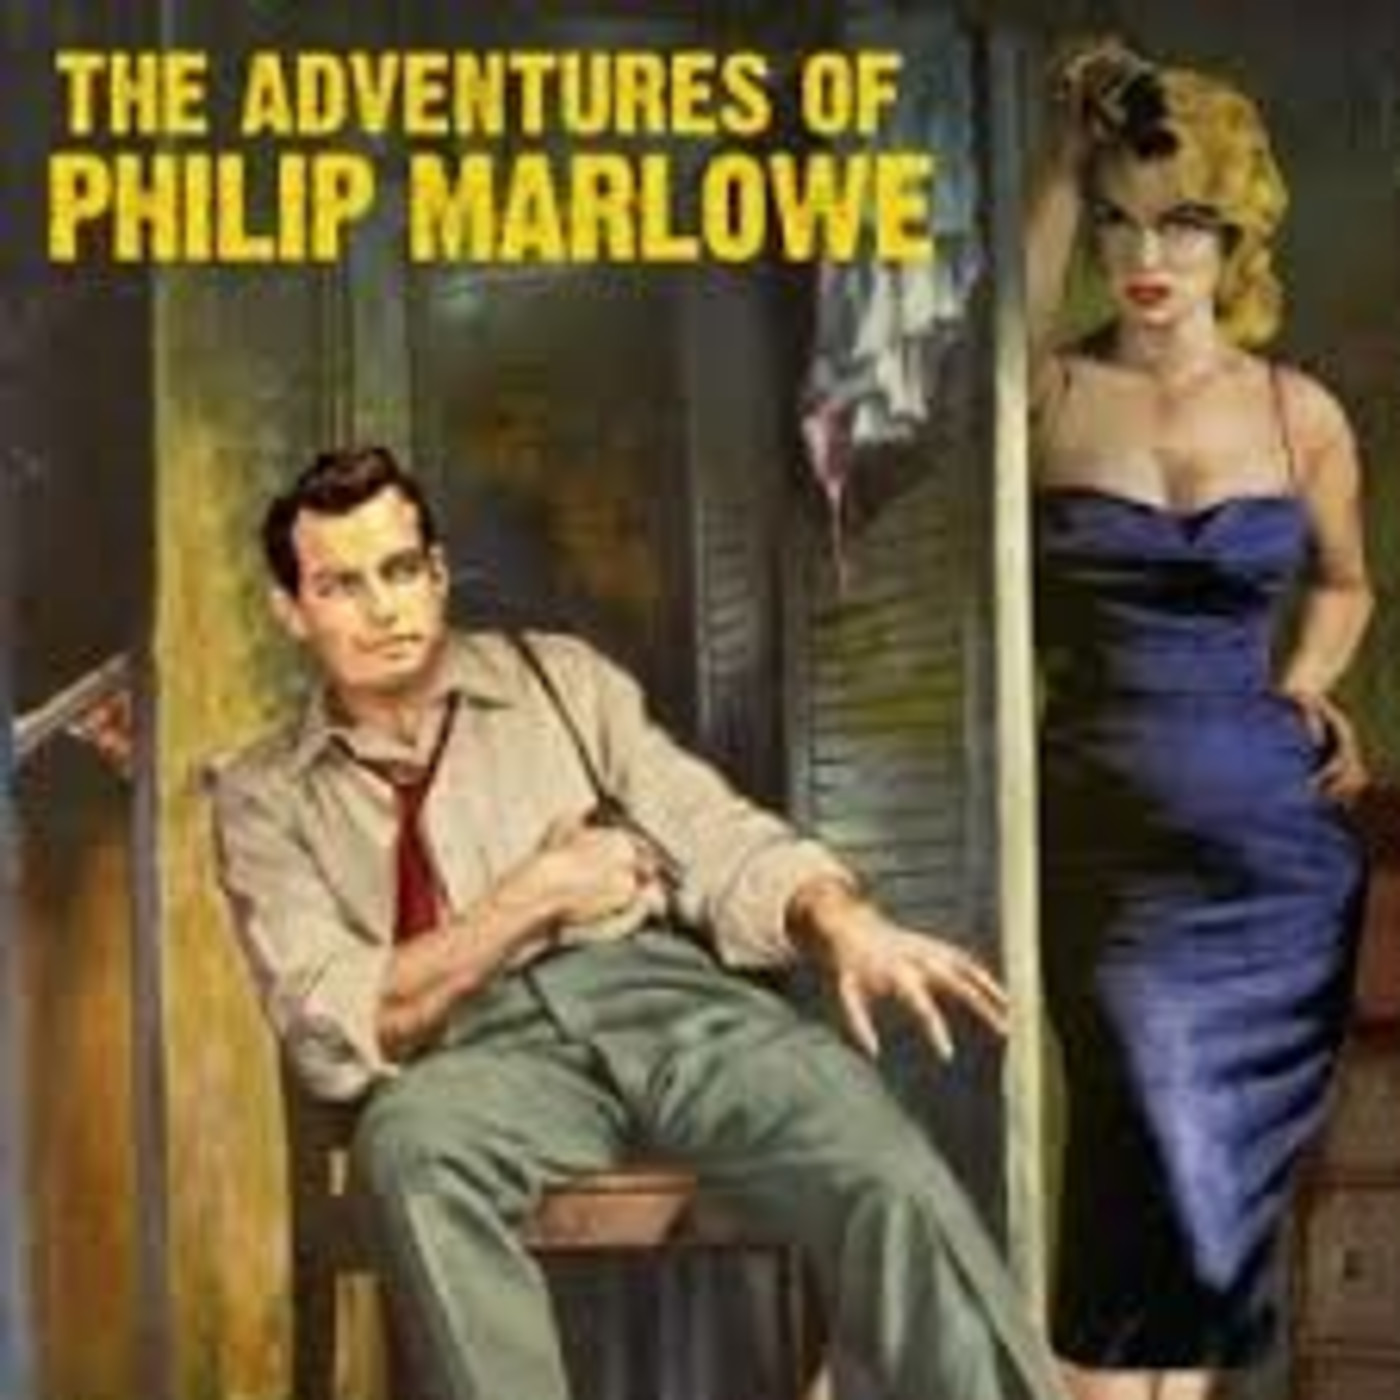 The Adventures of Philip Marlowe - The Collector's Item